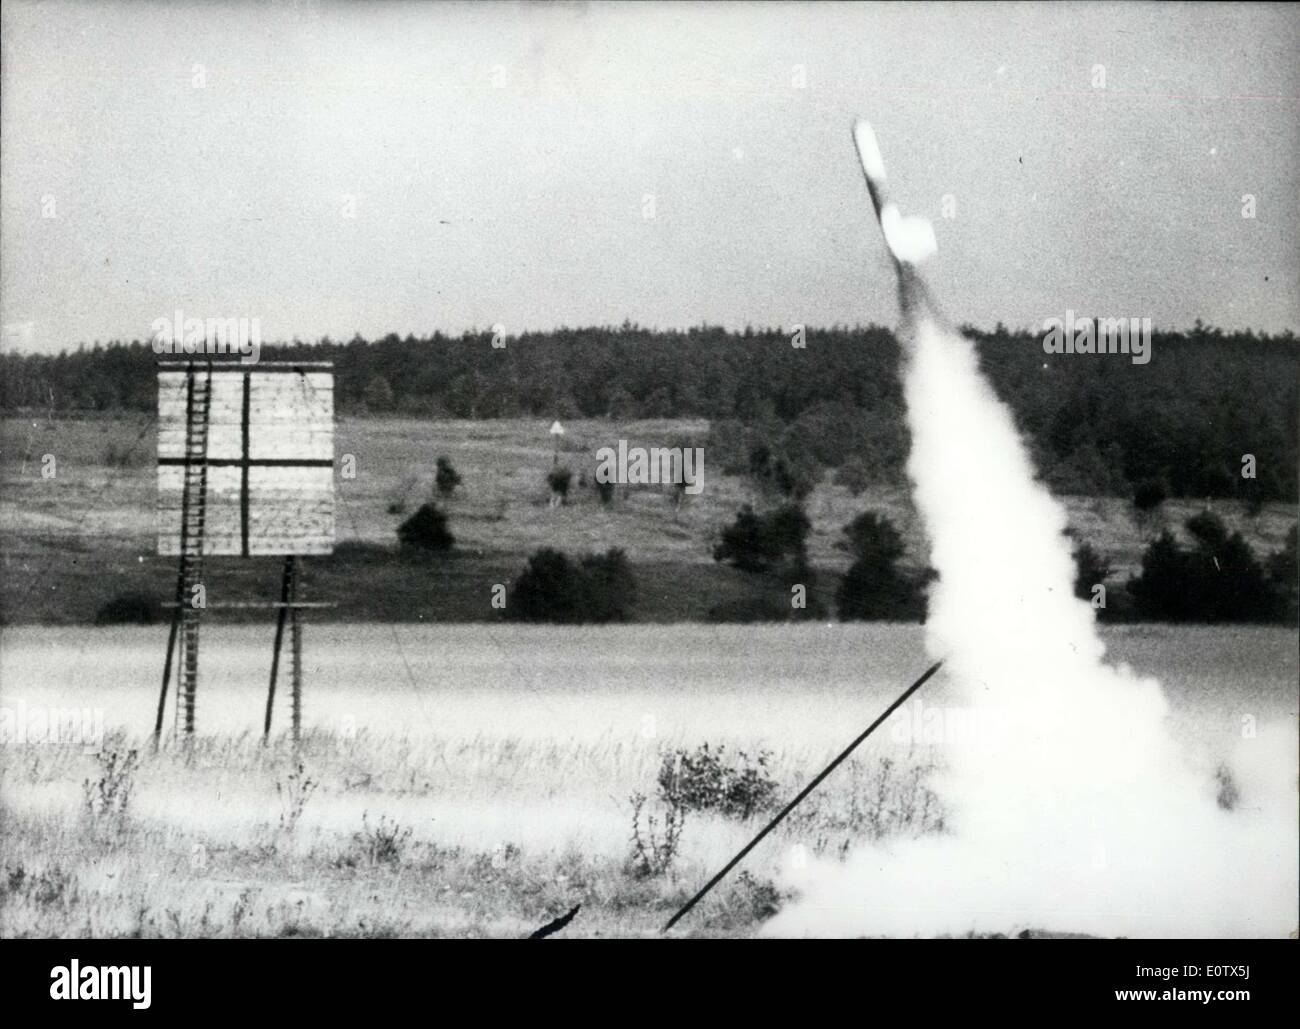 Aug. 23, 1960 - Will letters and cards soon come by rocket mail? : While Soviet scientists send animals and plants through space and Americans catch the instrument capsules of their satellites over the Pacific, also the German rocket scientists are busily working. On Aug, 21st, near Celle (CELLE)/Northern Germany, ten test rockets were started. They delivered about 3600 post-cards letters over a distance of 1500 metres Stock Photo